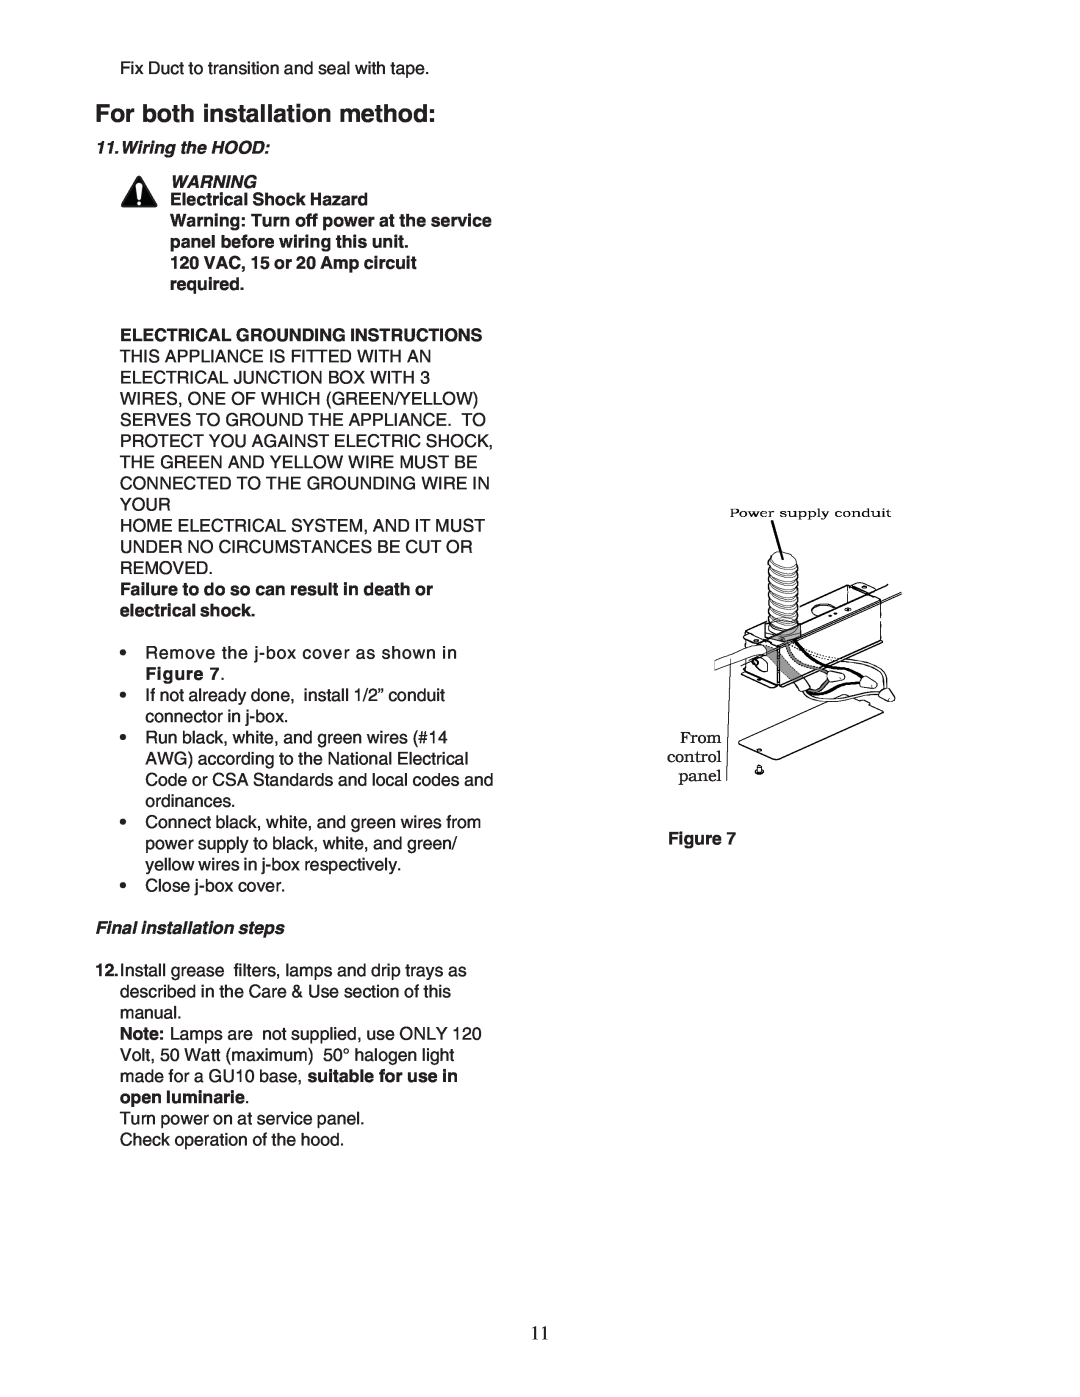 Thermador PHH36DS, PHH30DS manual For both installation method, Wiring the HOOD, Final installation steps 